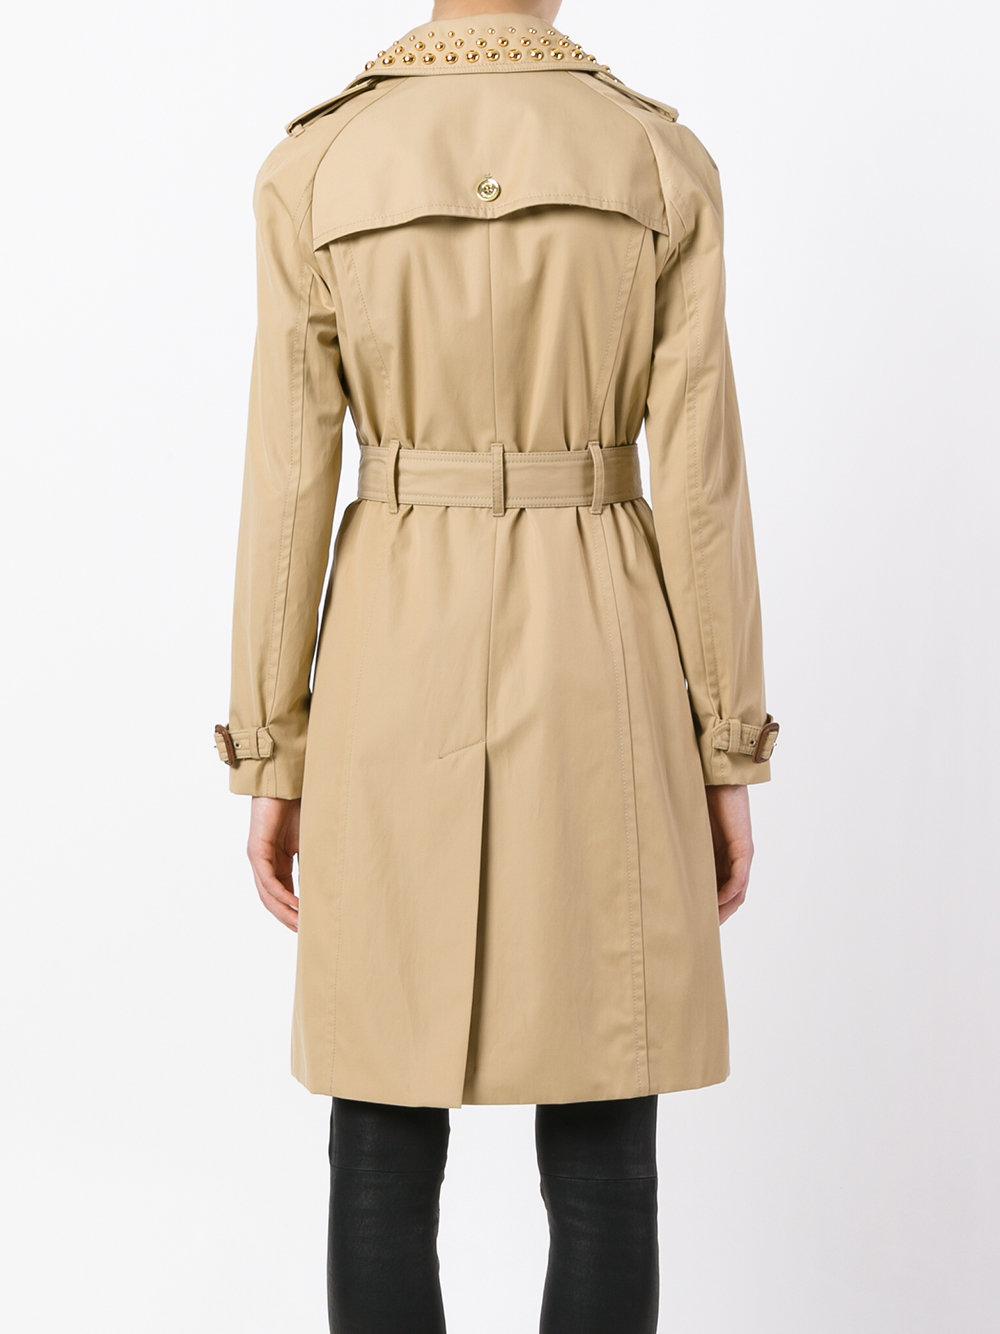 MICHAEL Michael Kors Cotton Studded Trench Coat in Natural - Lyst